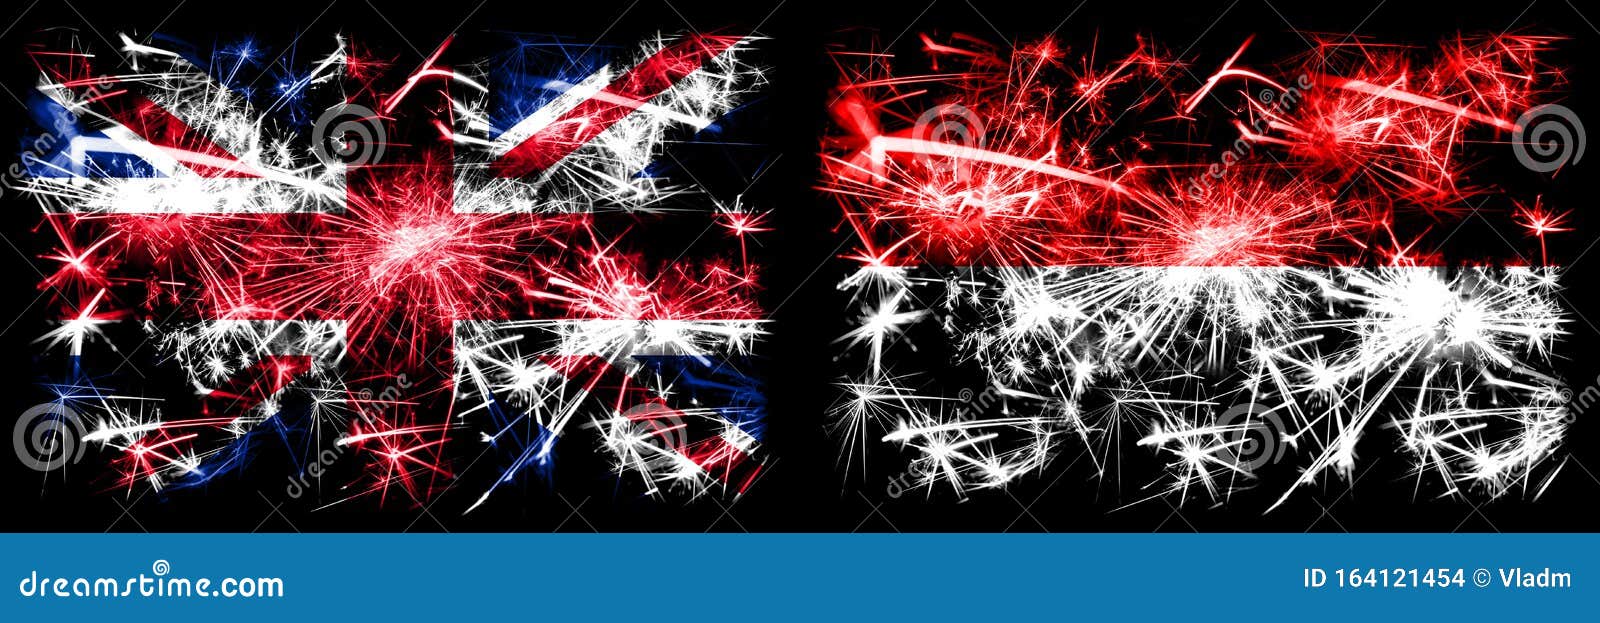 Great Britain United Kingdom Vs Indonesia Indonesian New Year Celebration Travel Sparkling Fireworks Flags Concept Background Stock Photo Image Of Explosion Protest